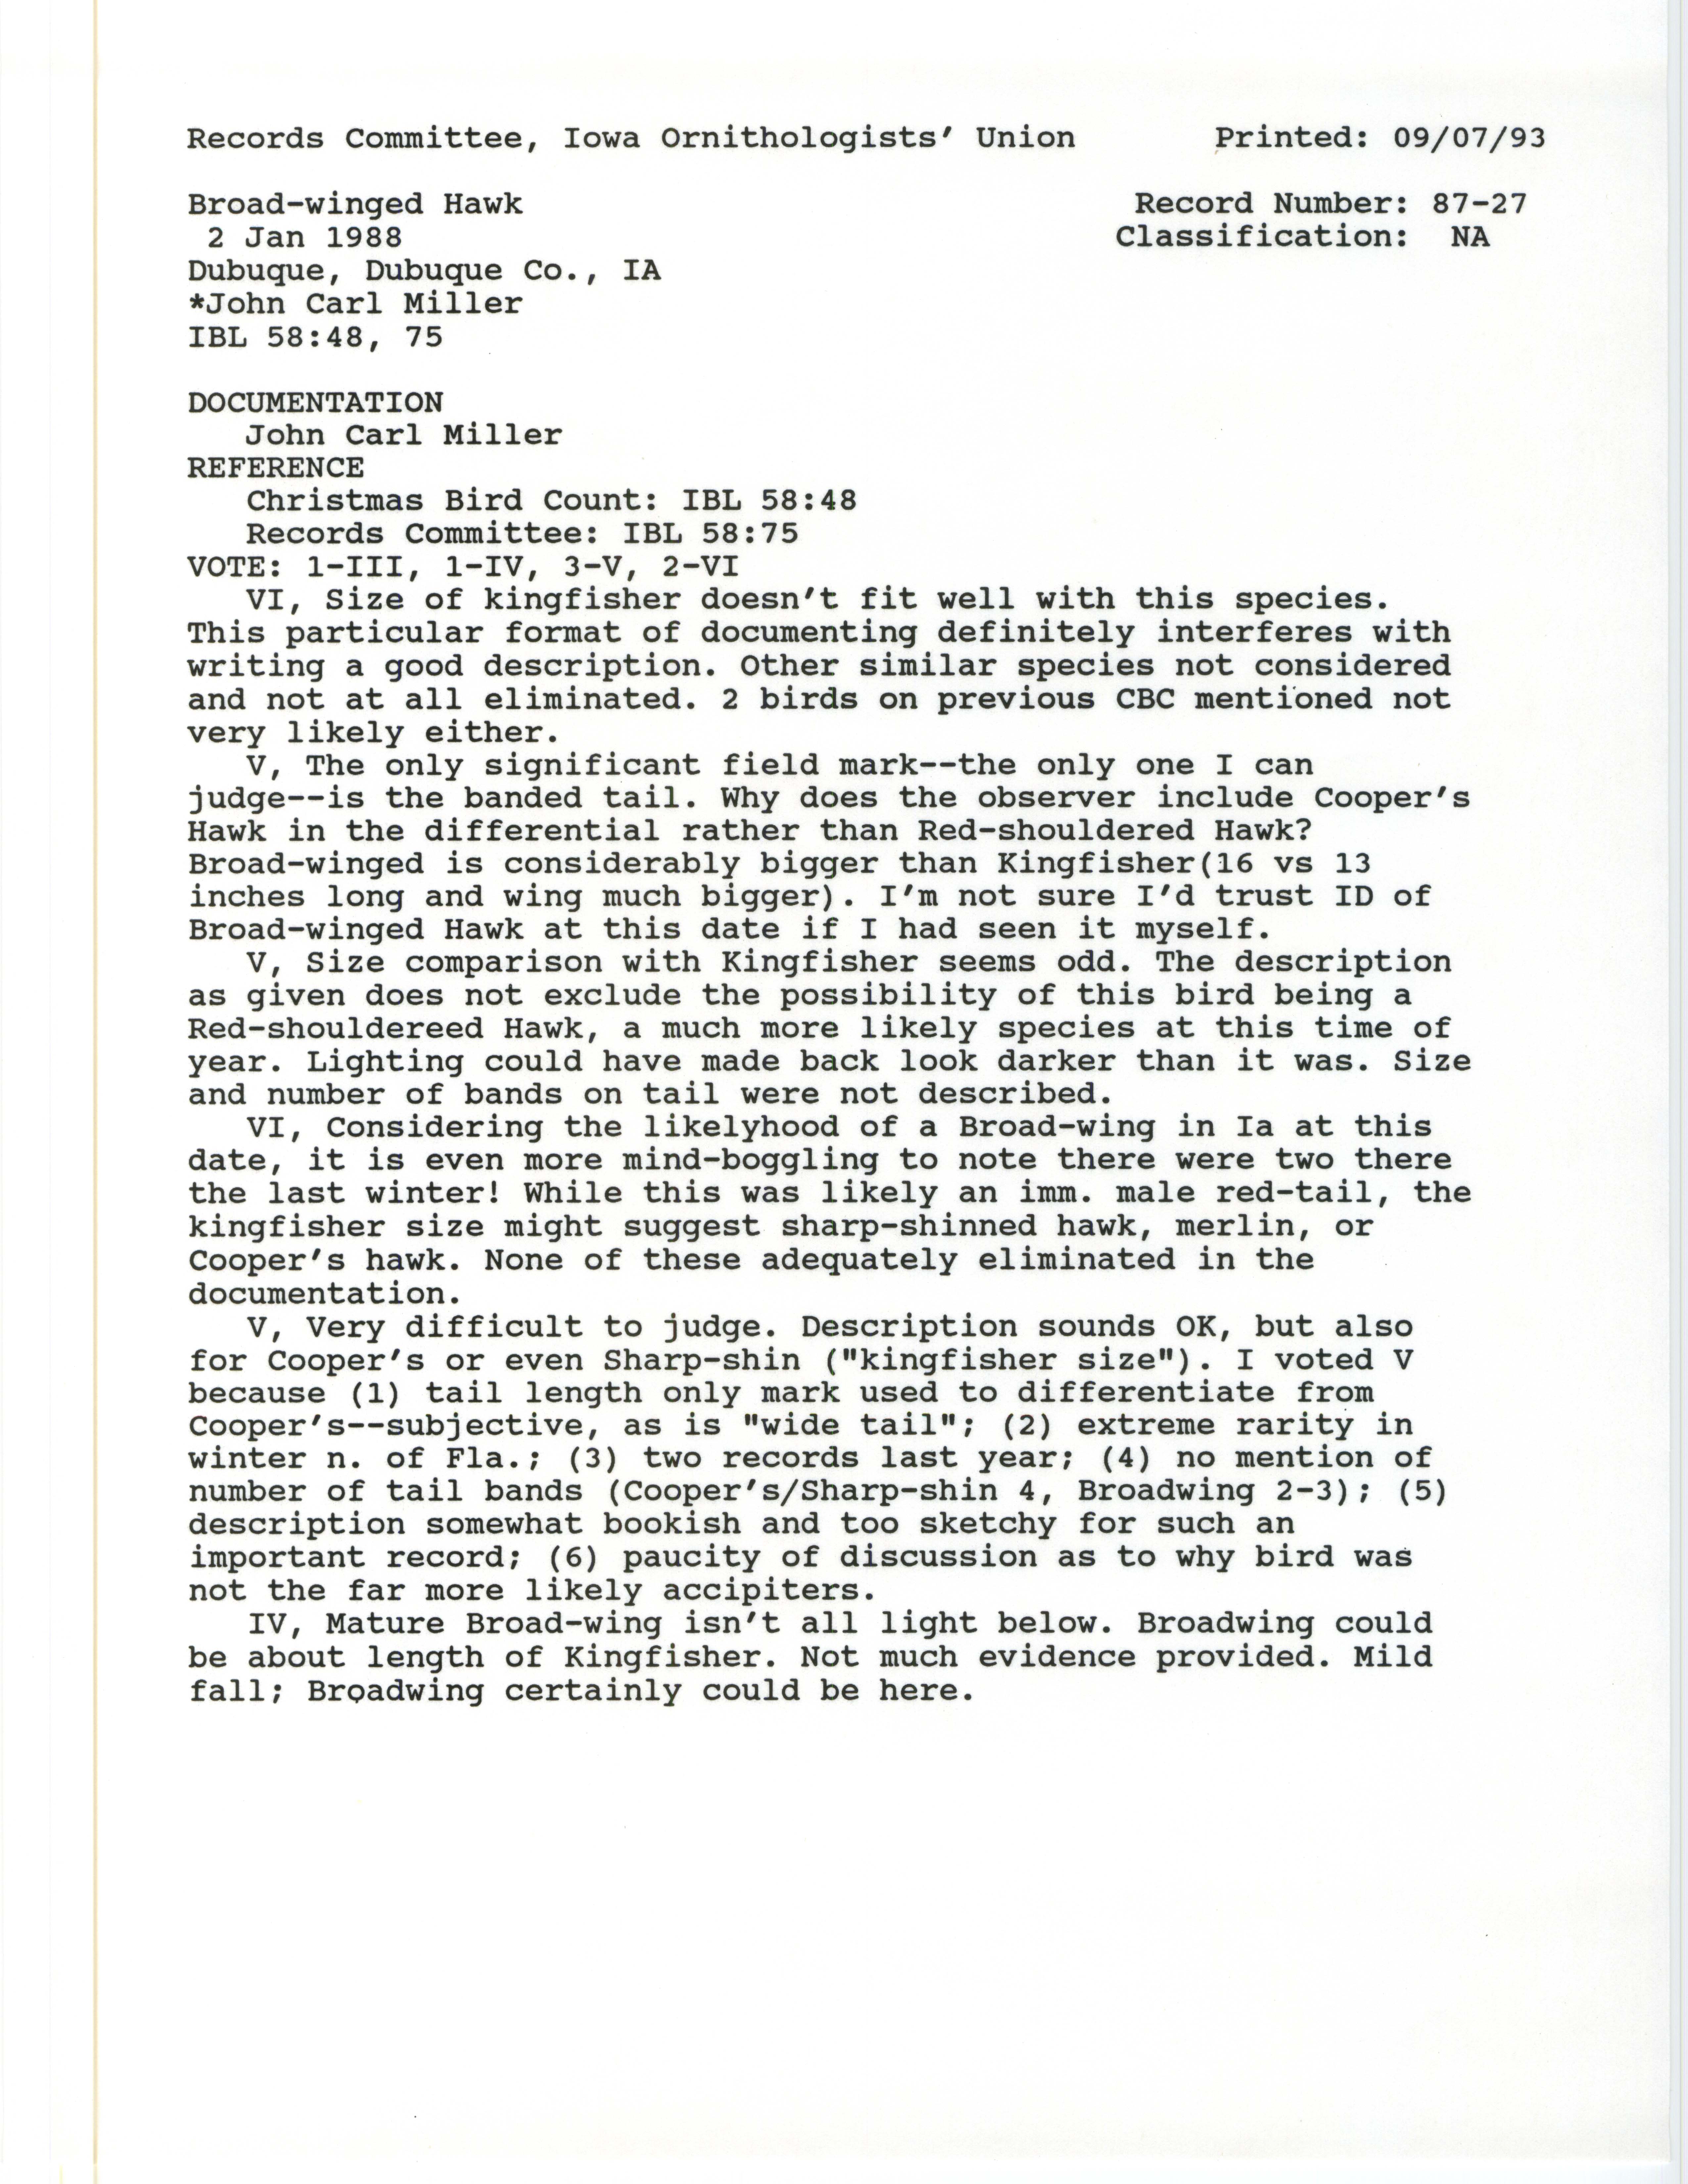 Records Committee review for rare bird sighting of Broad-winged Hawk at Dubuque, 1988